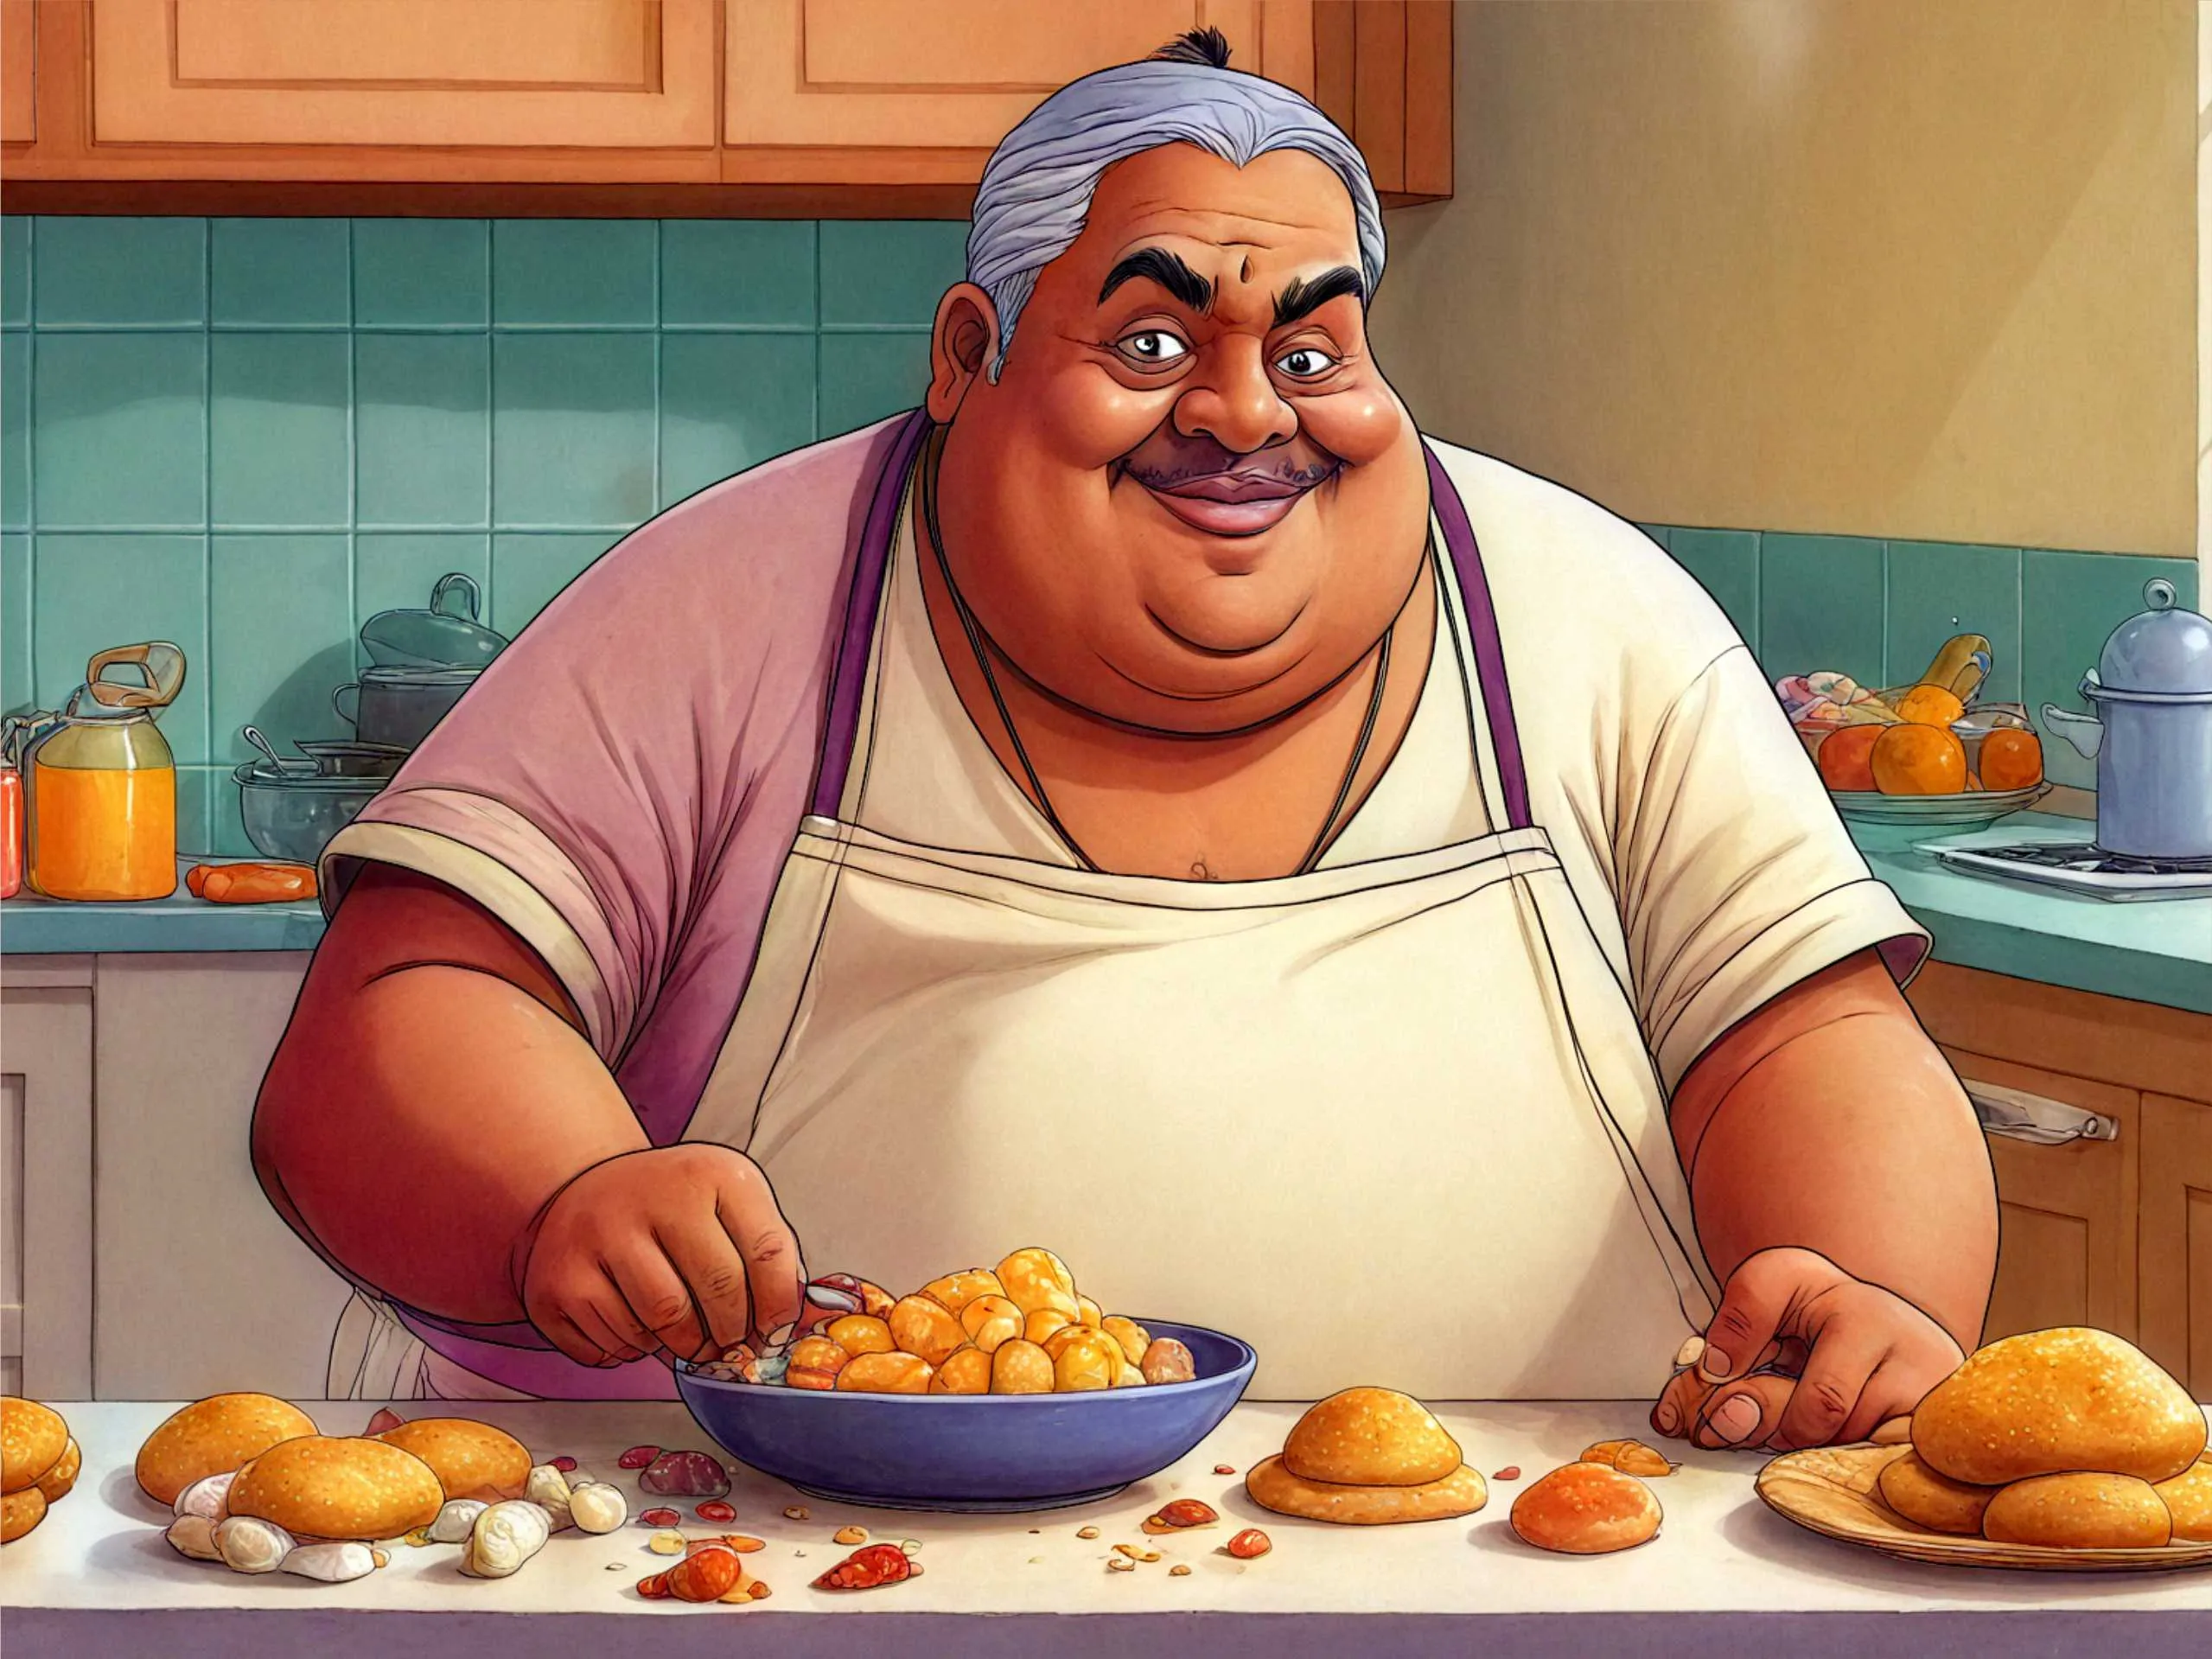 cartoon image of a fat man in kitchen